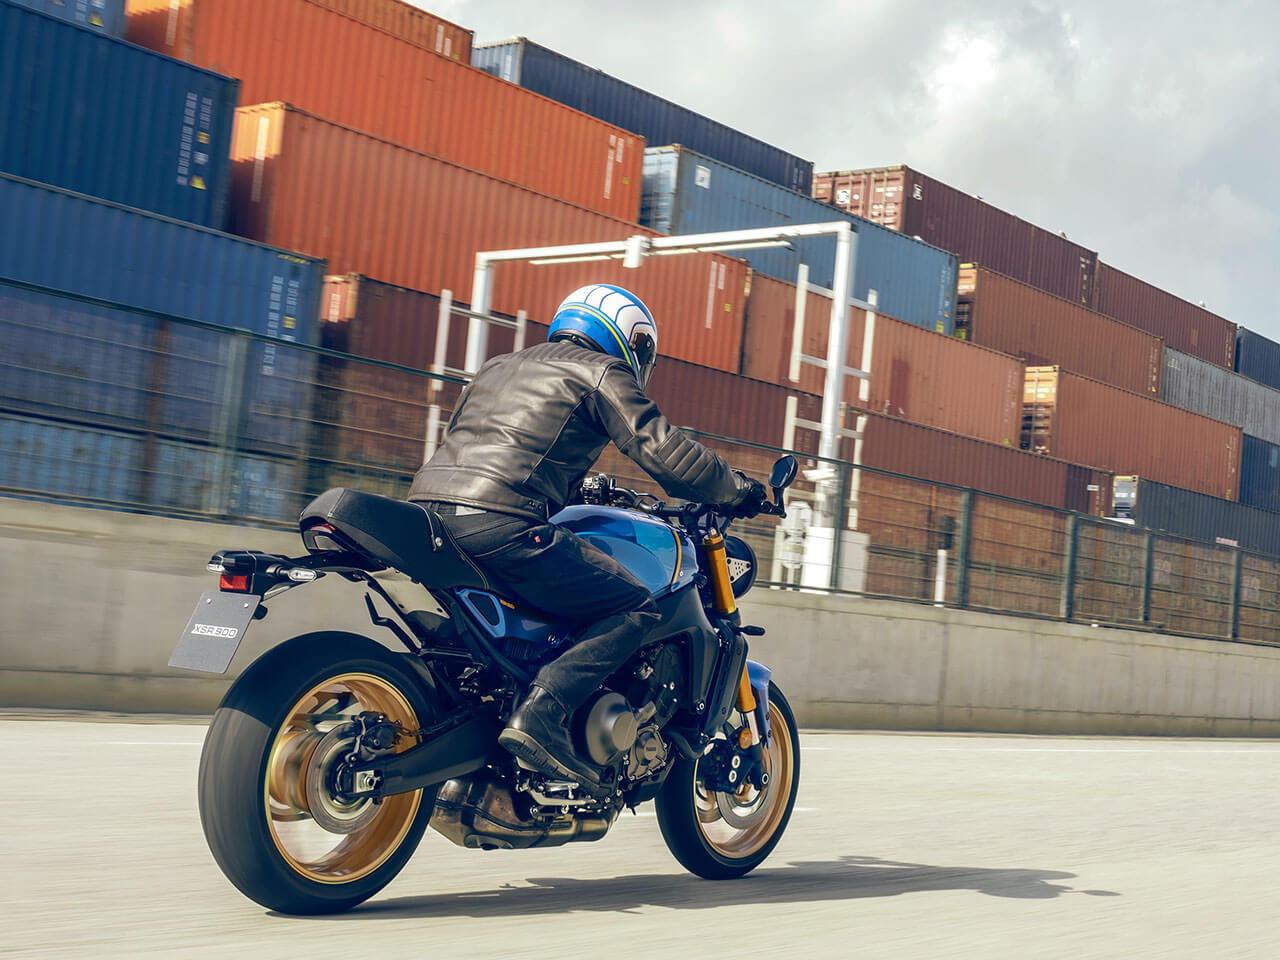 The 2022 Yamaha XSR900 motorcycle rides past a cargo container storage area